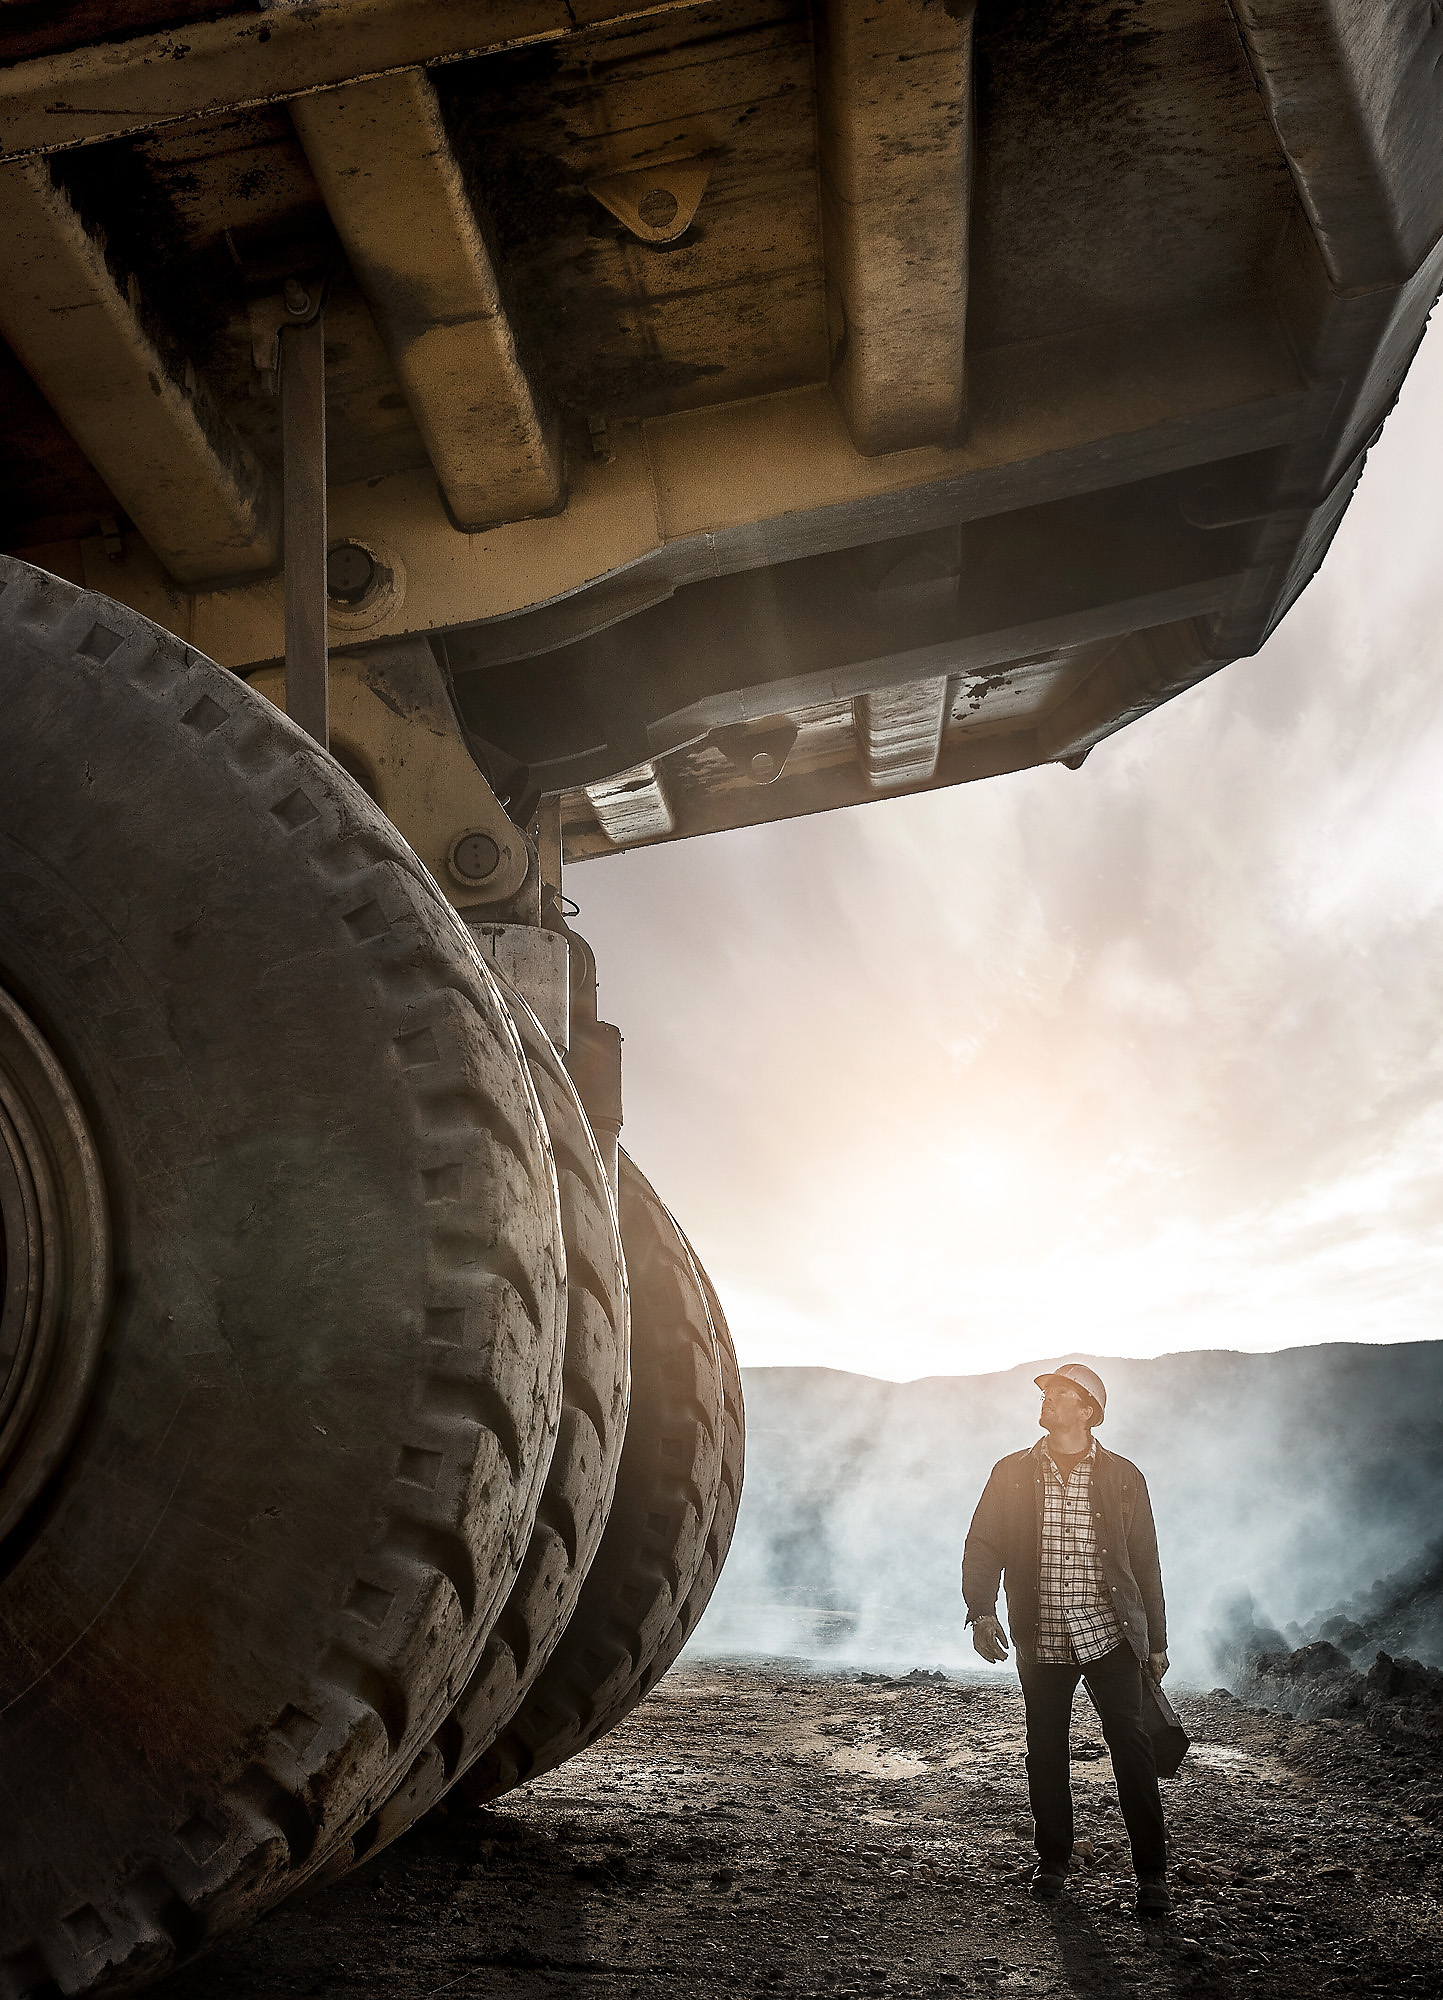 Colorado Coal Mine Photo Shoot Features One of the World's Biggest Dump Trucks. Top Photographer, Tyler Stableford, Shot these Images Near Somerset, CO.